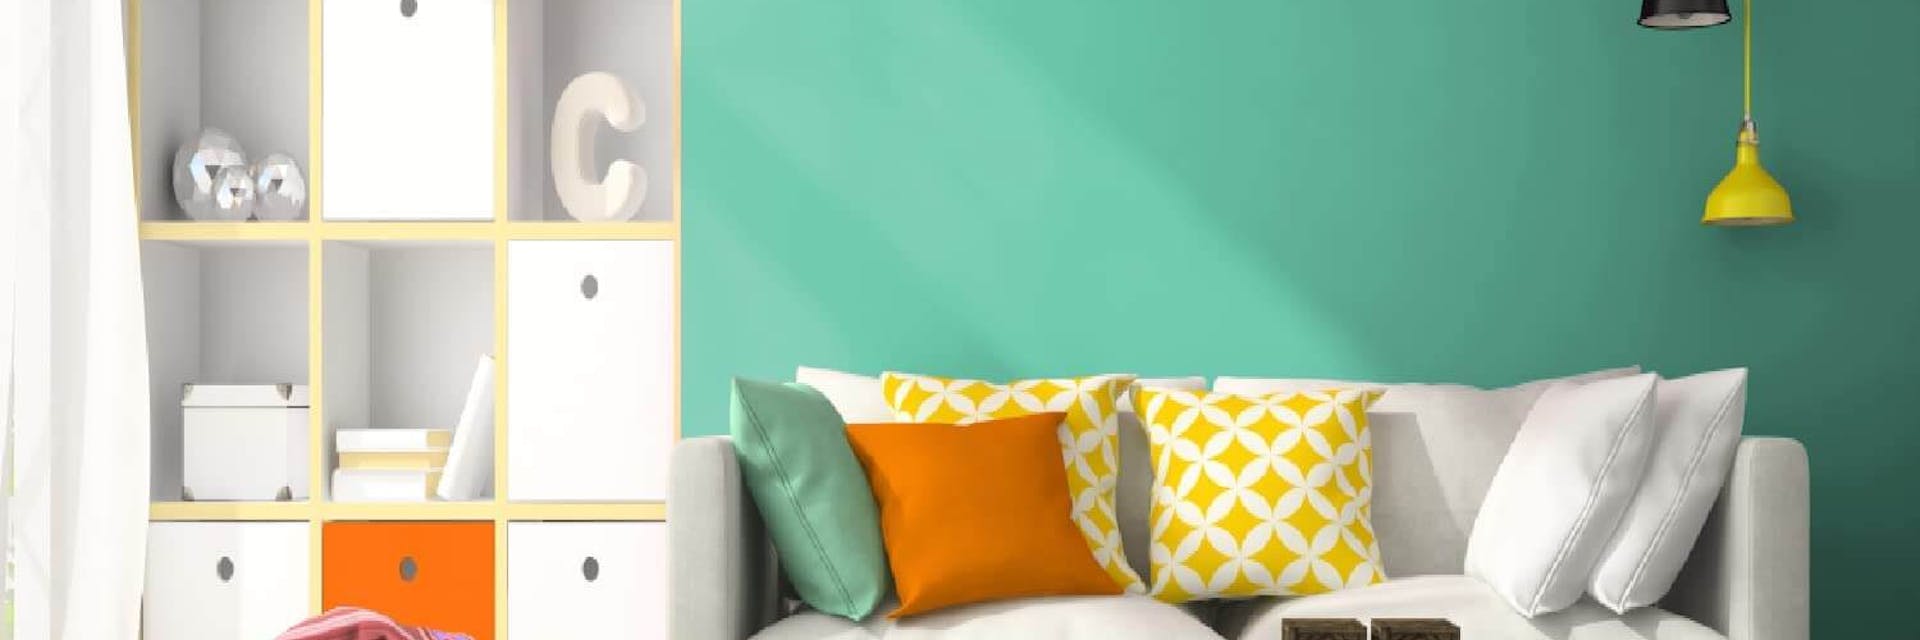 vibrant teal living room wall